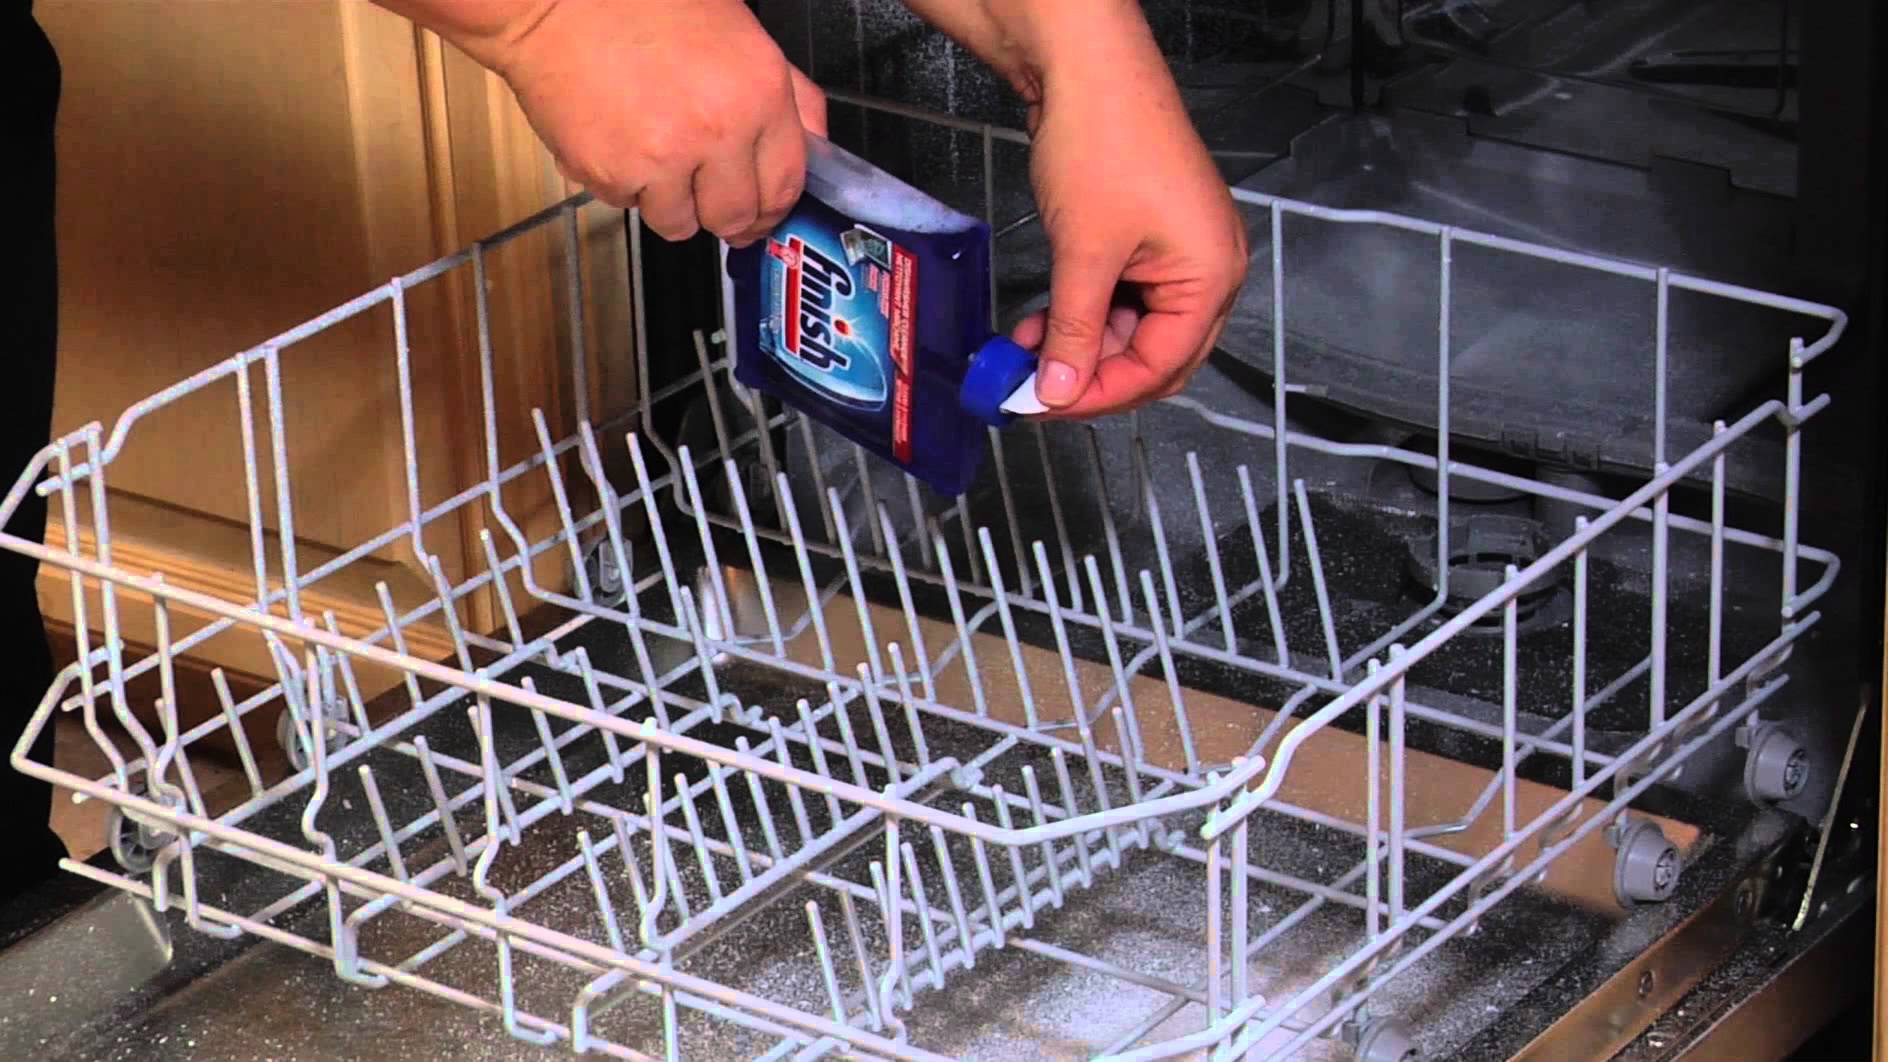 man placing s dishwasher cleanser inside the machine